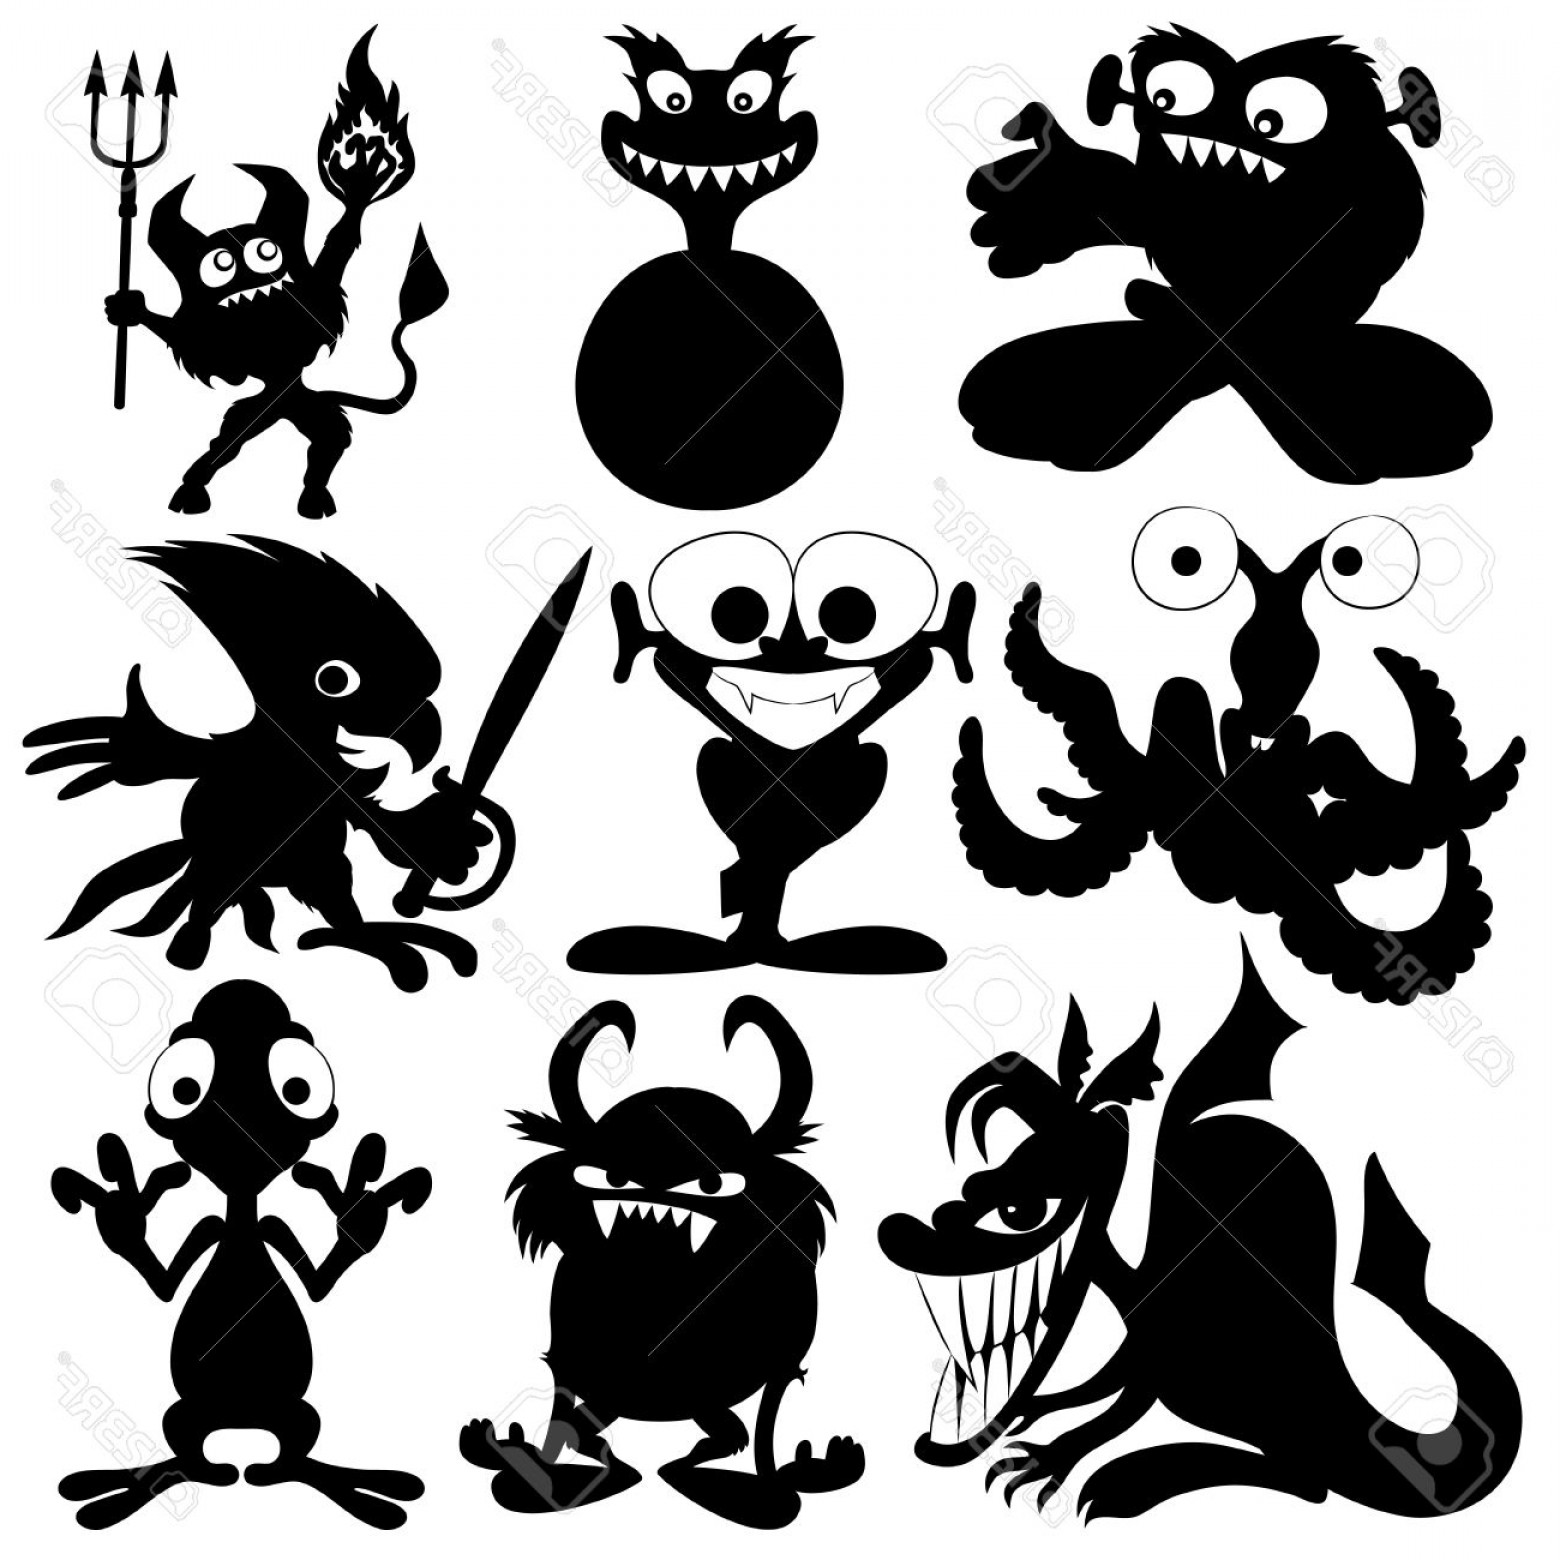 Download monster silhouette free clipart 20 free Cliparts ...